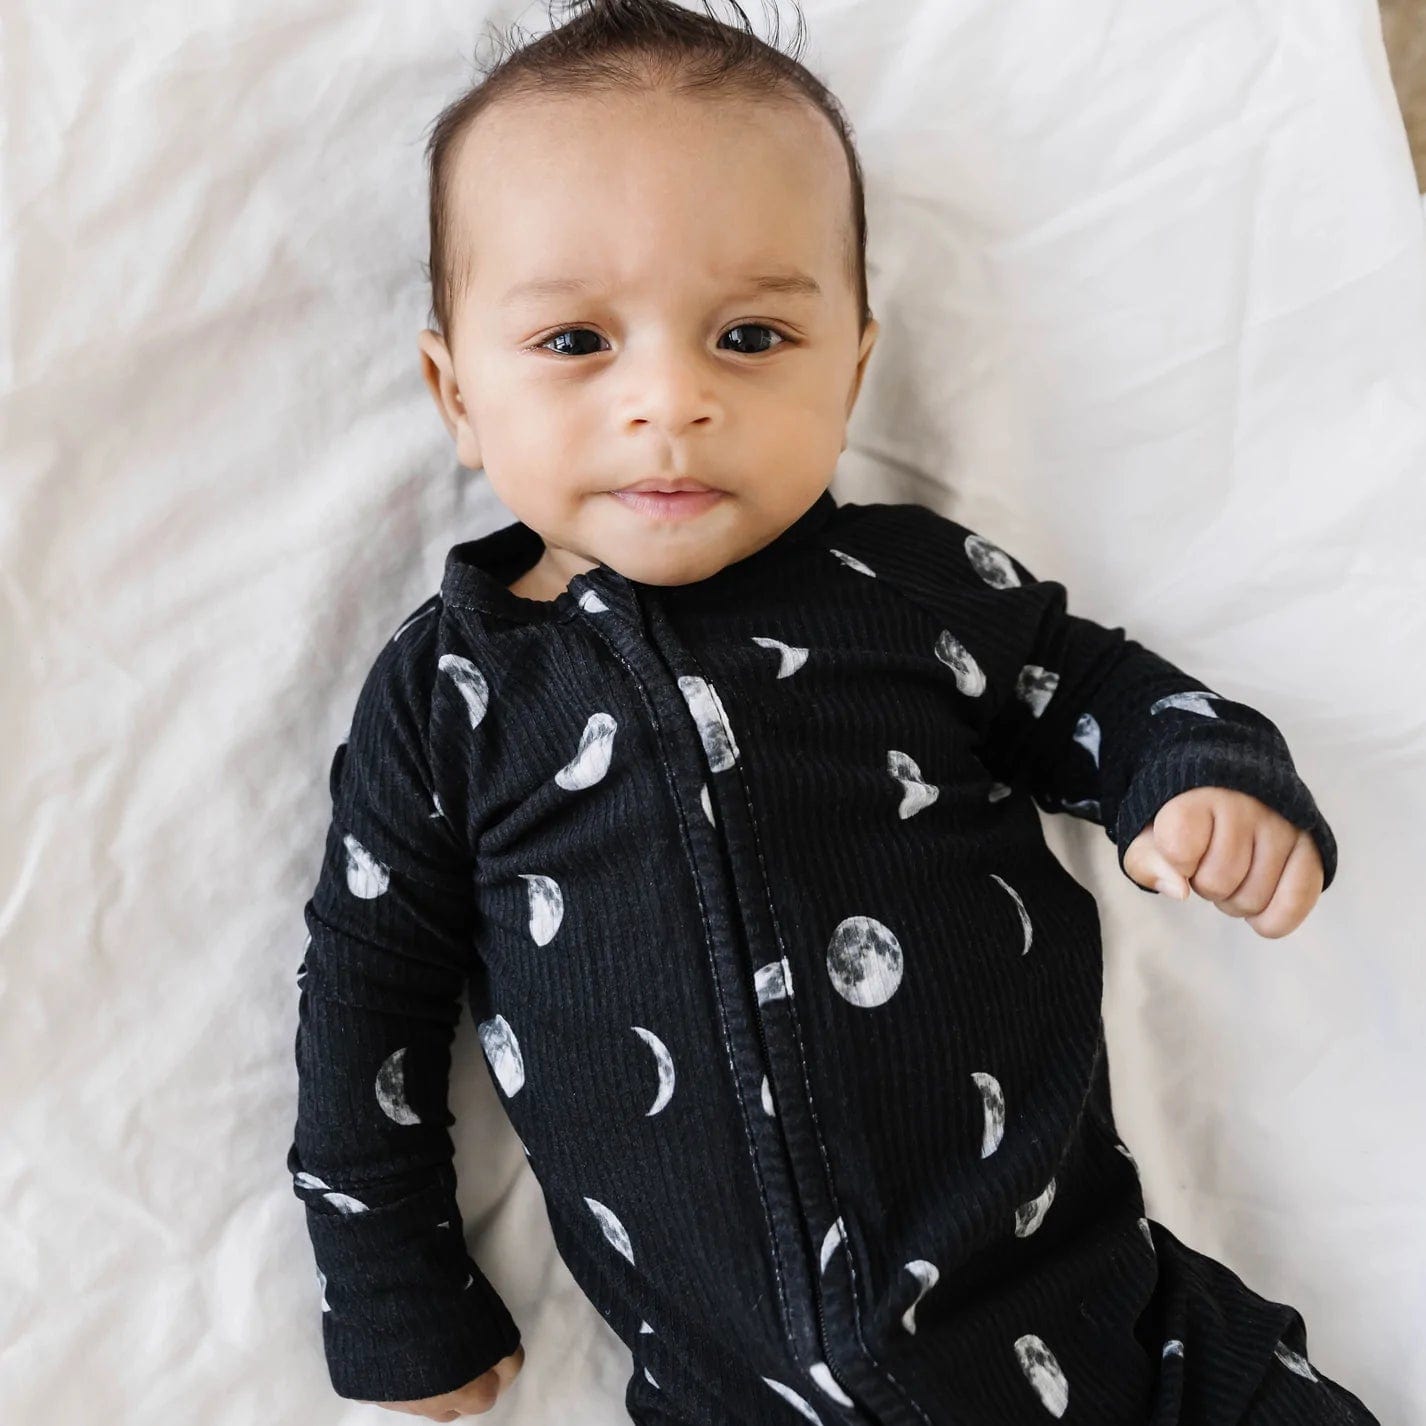 Moon Phases Ribbed Zip Romper Brave Little Ones Lil Tulips